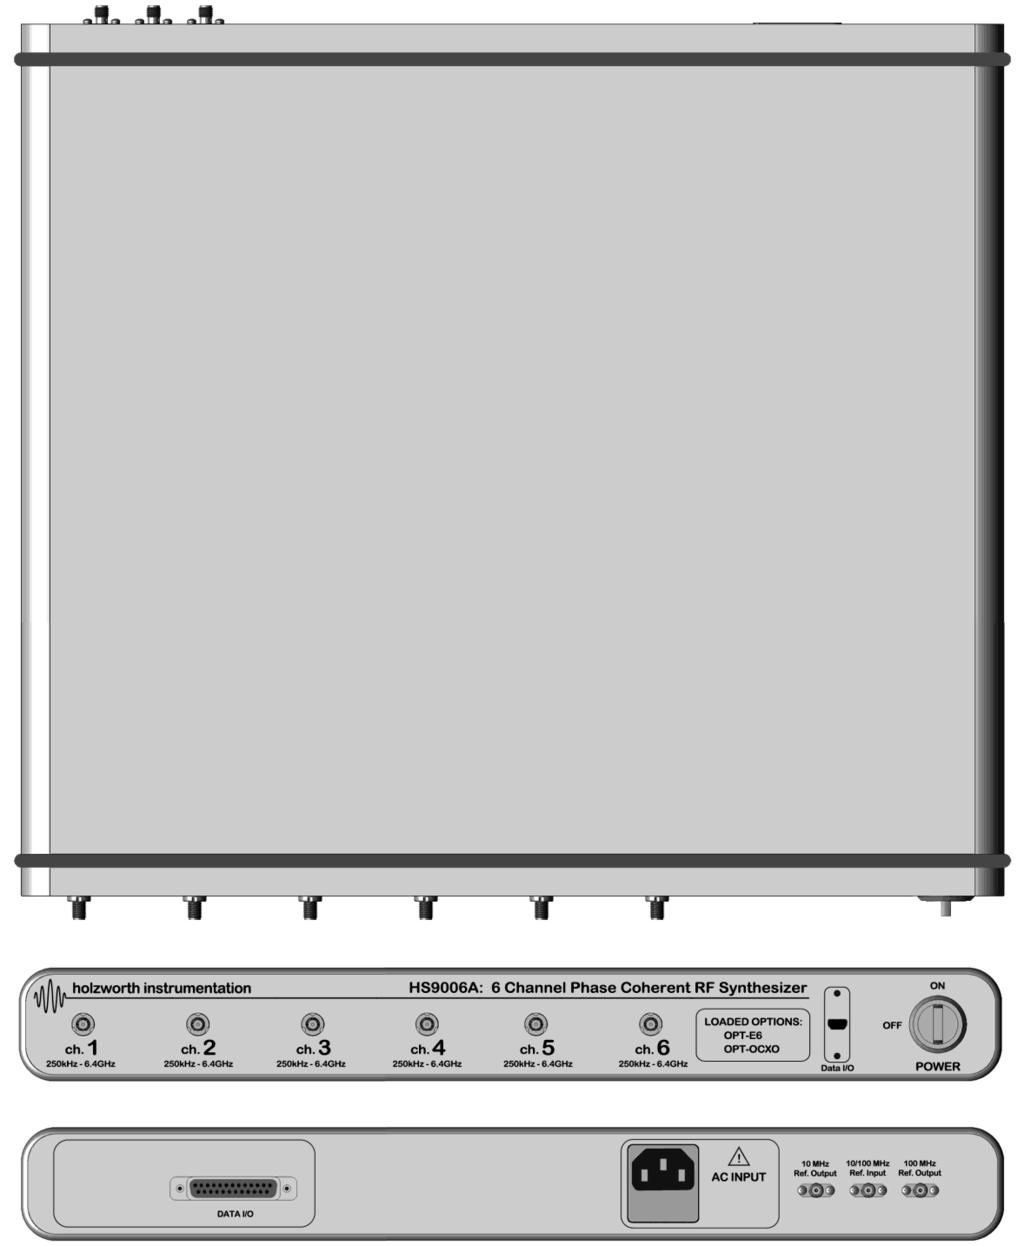 MECHANICAL CONFIGURATION The HS9000 Series comes in a 1U high, rack mountable chassis. The example shown is of a 6 channel unit (front panel configuration may vary).